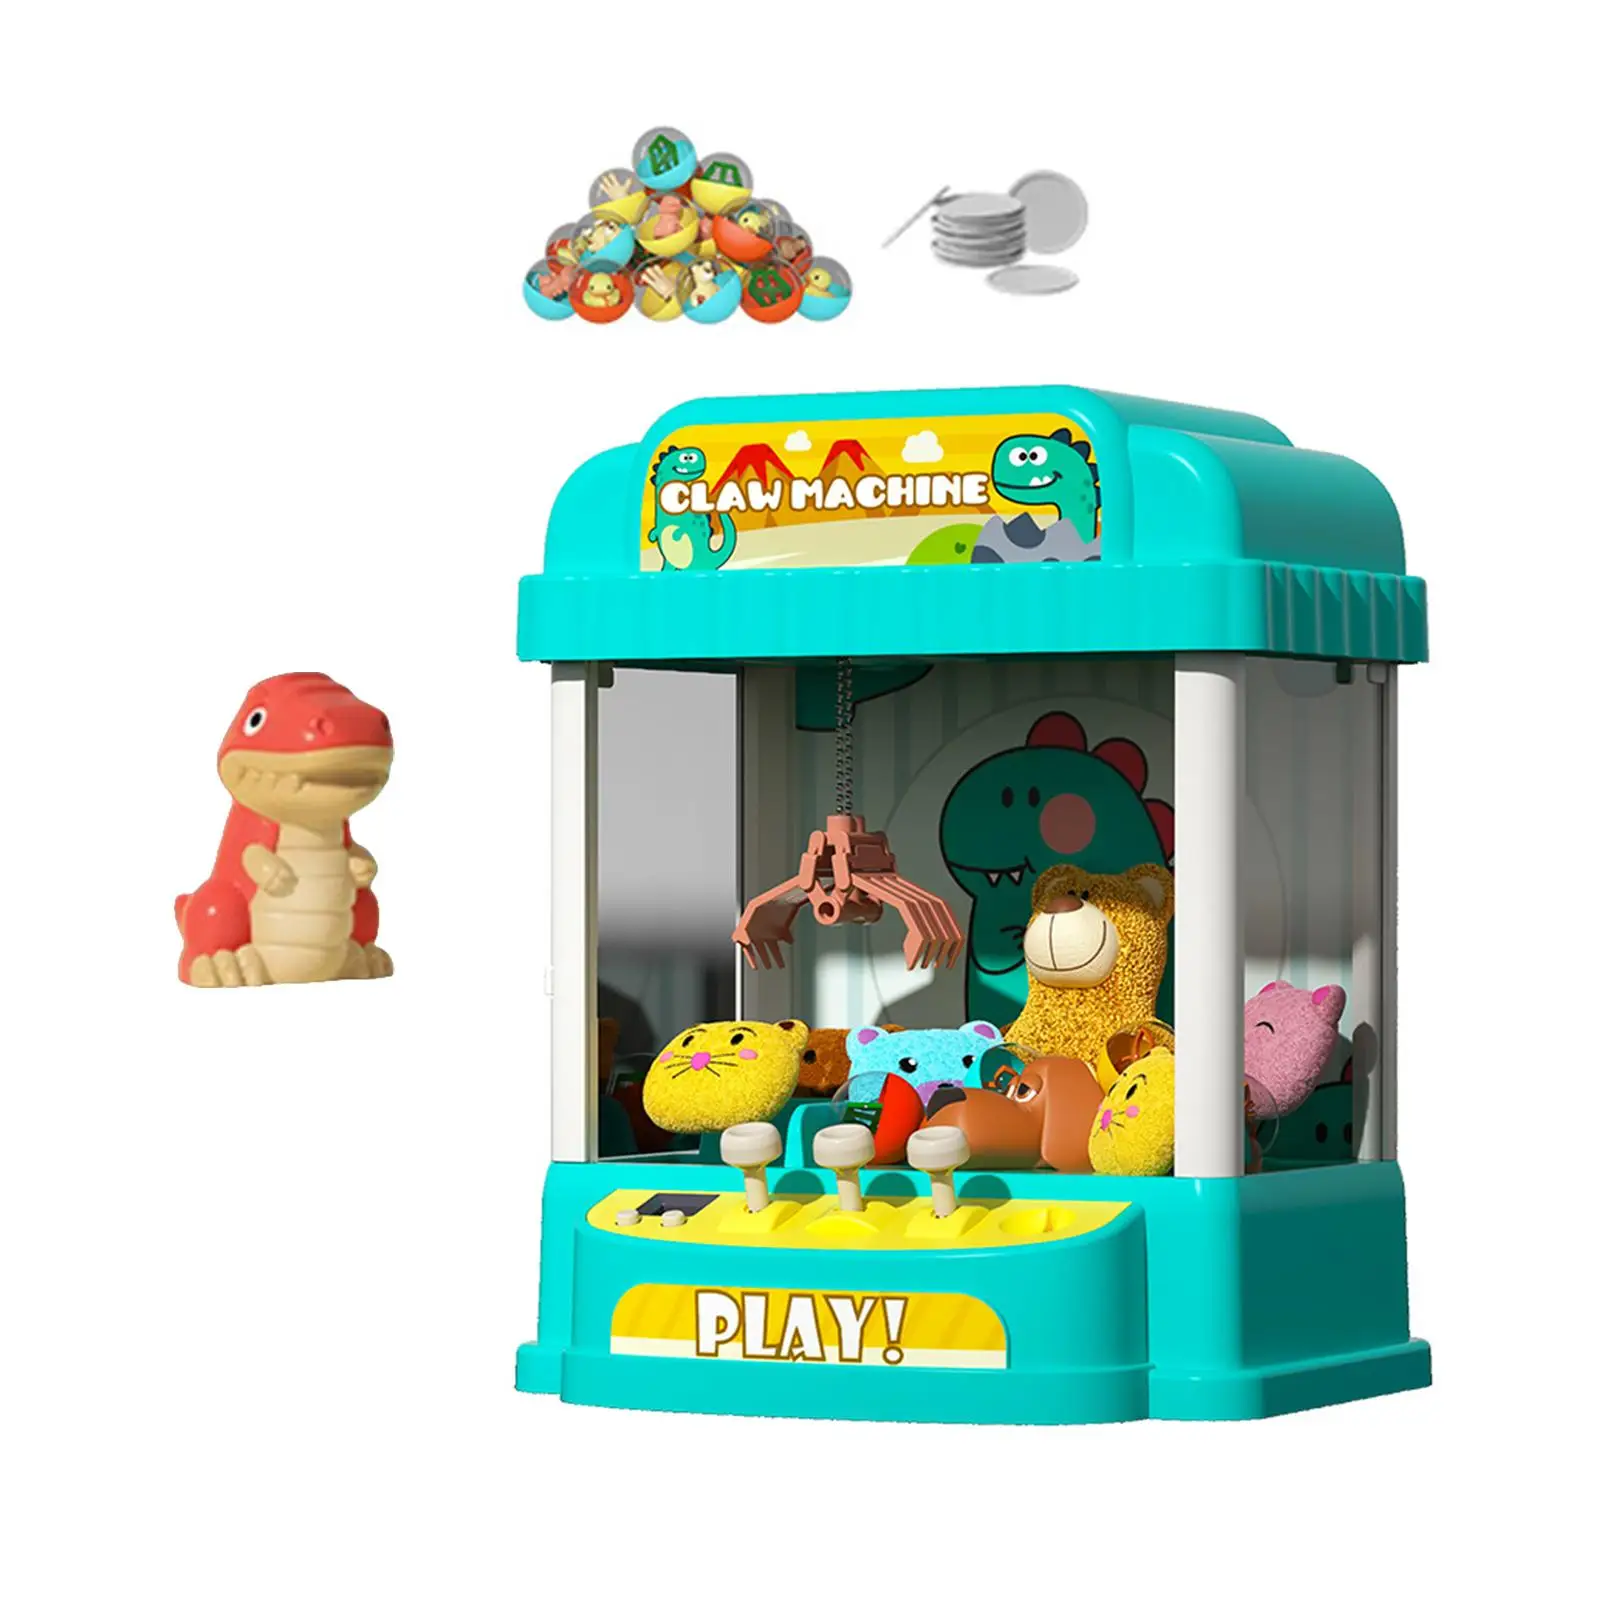 Reusable Small Claw Machine Mini Arcade Machine Vending Machine with Sounds Prize Dispenser for Toddlers Boys Girls Kids Gifts